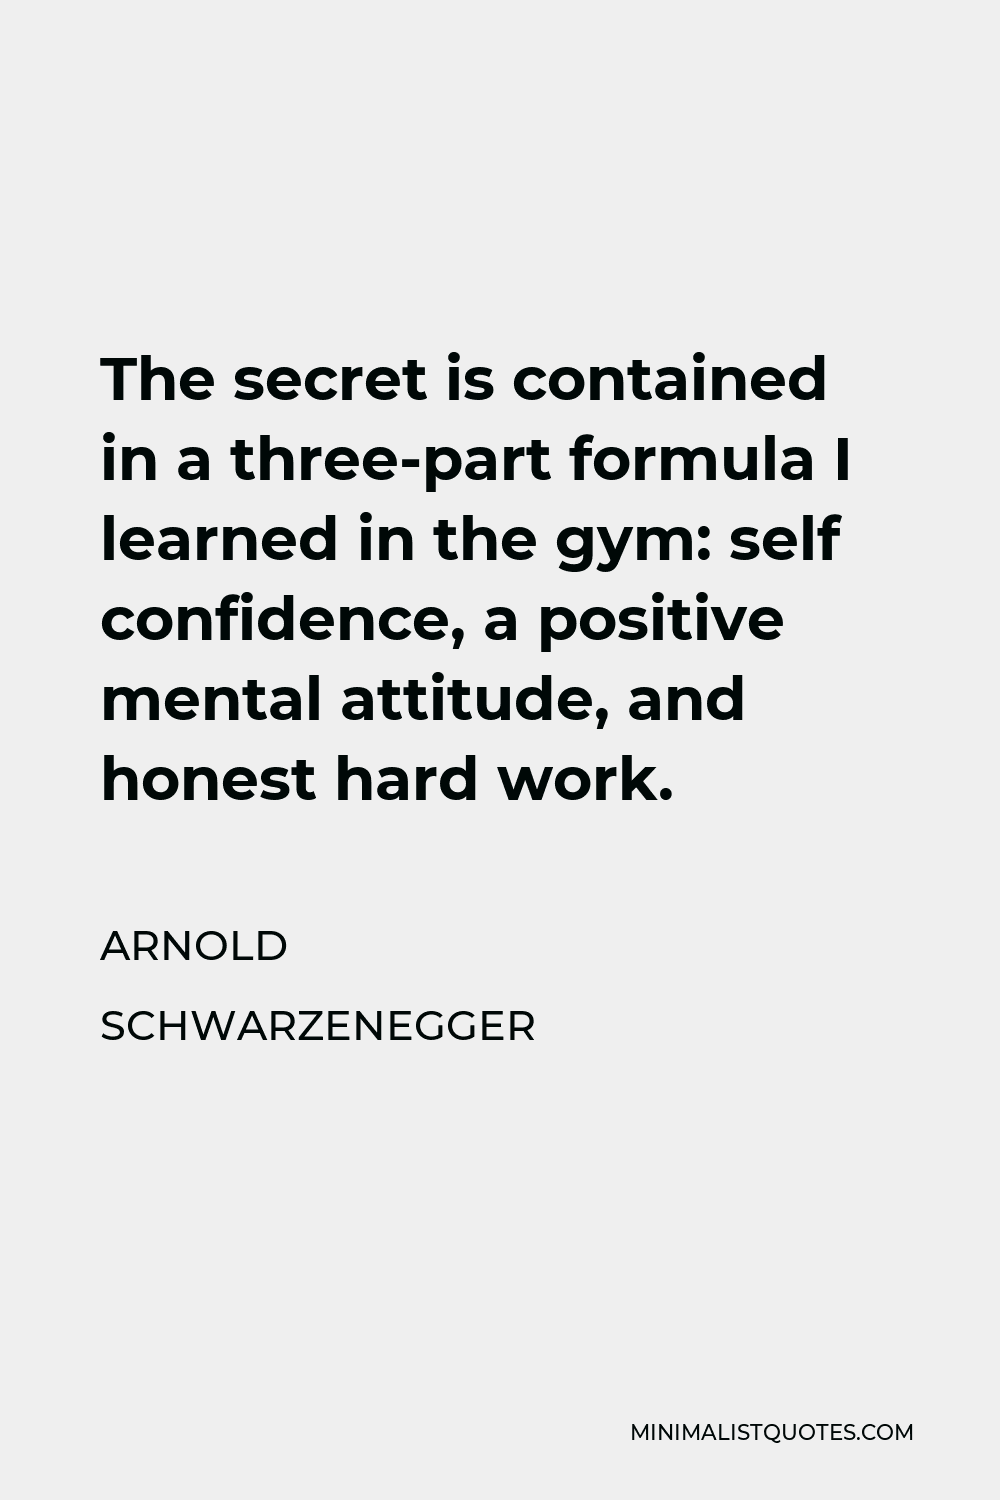 Arnold Schwarzenegger Quote - The secret is contained in a three-part formula I learned in the gym: self confidence, a positive mental attitude, and honest hard work.